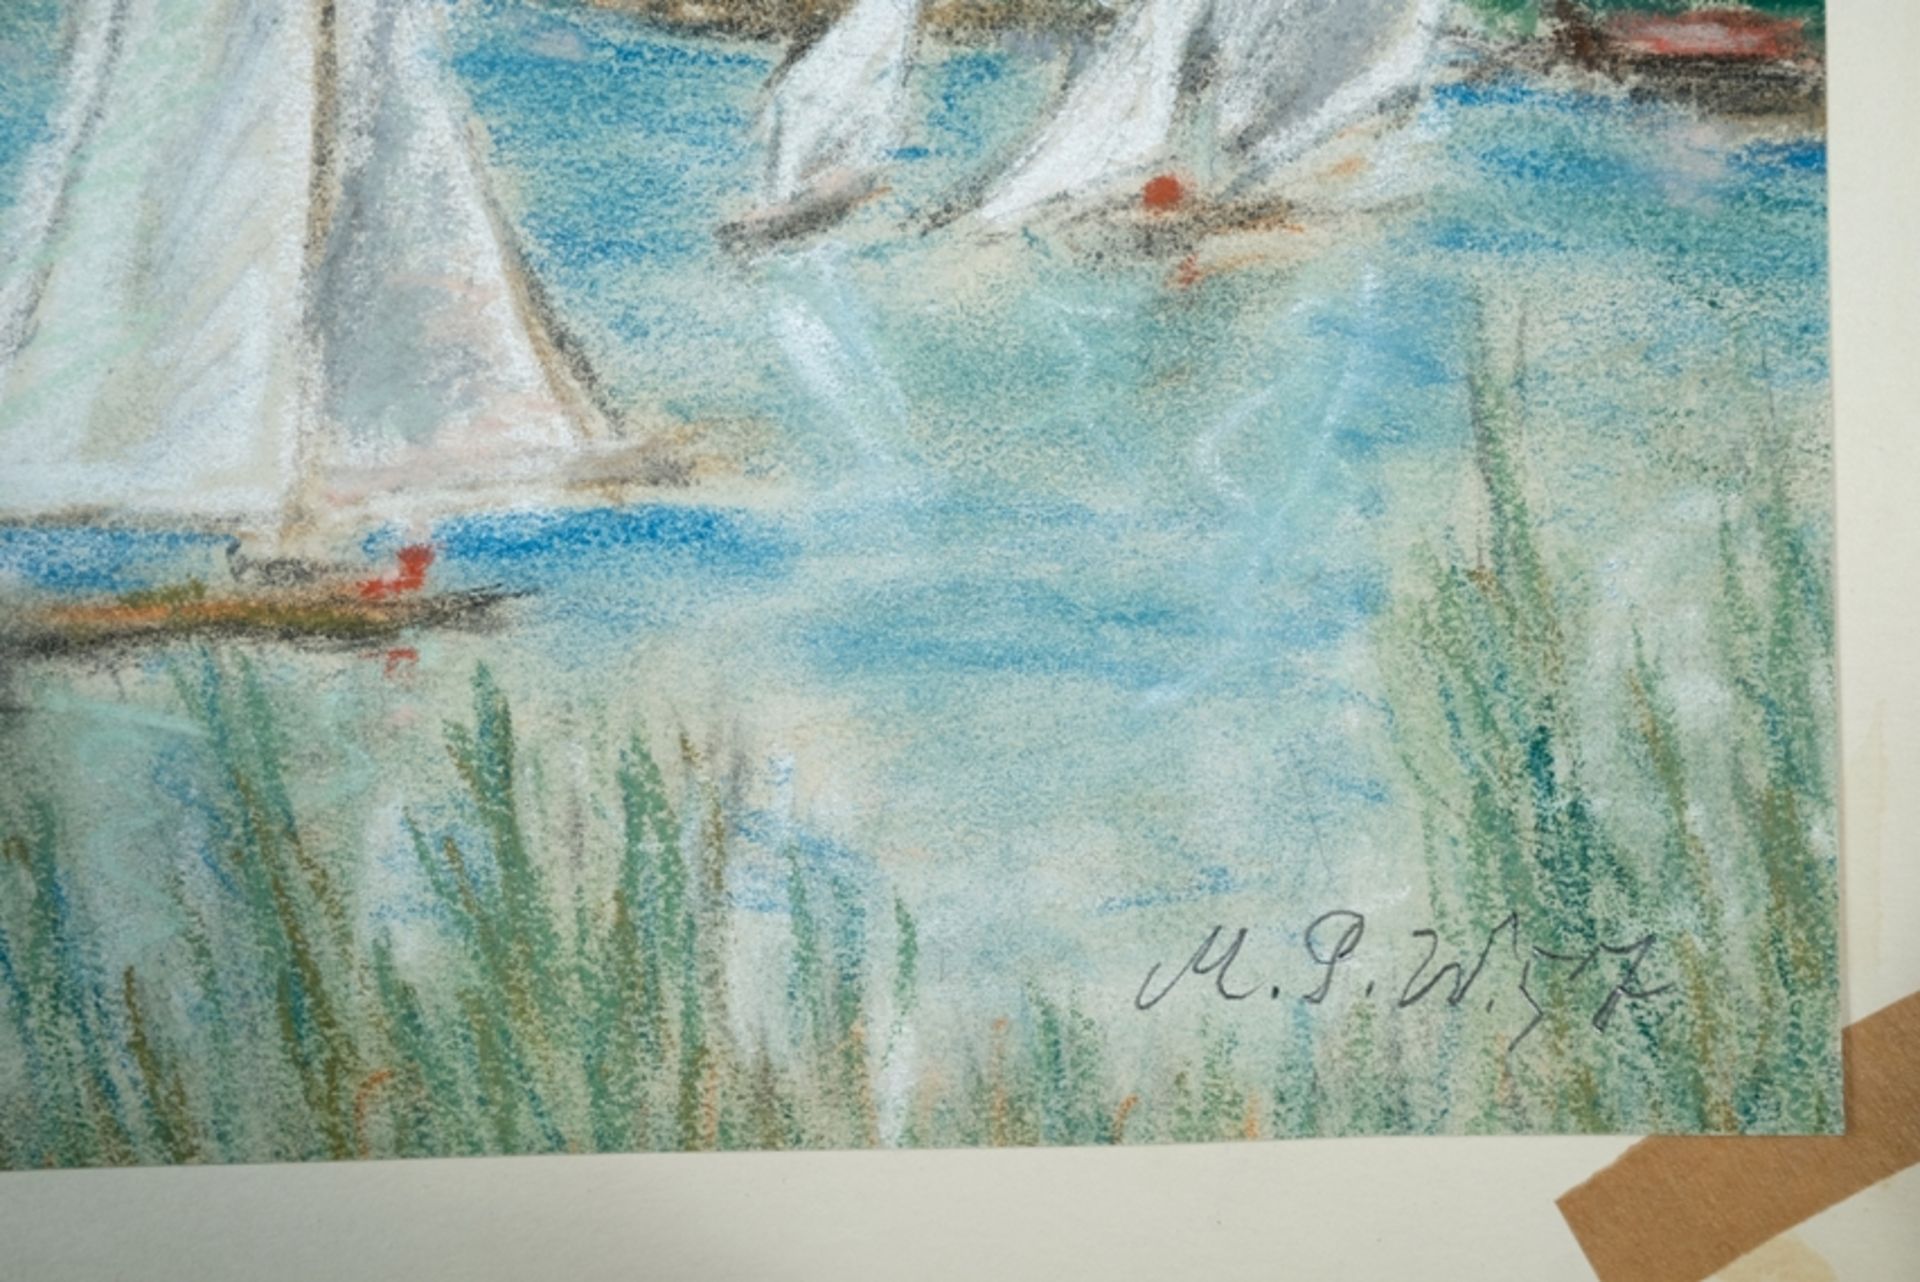 Peifer-Watenphul, Max (1896-1976) Lake Constance, colour drawing on paper, 1957. - Image 2 of 3